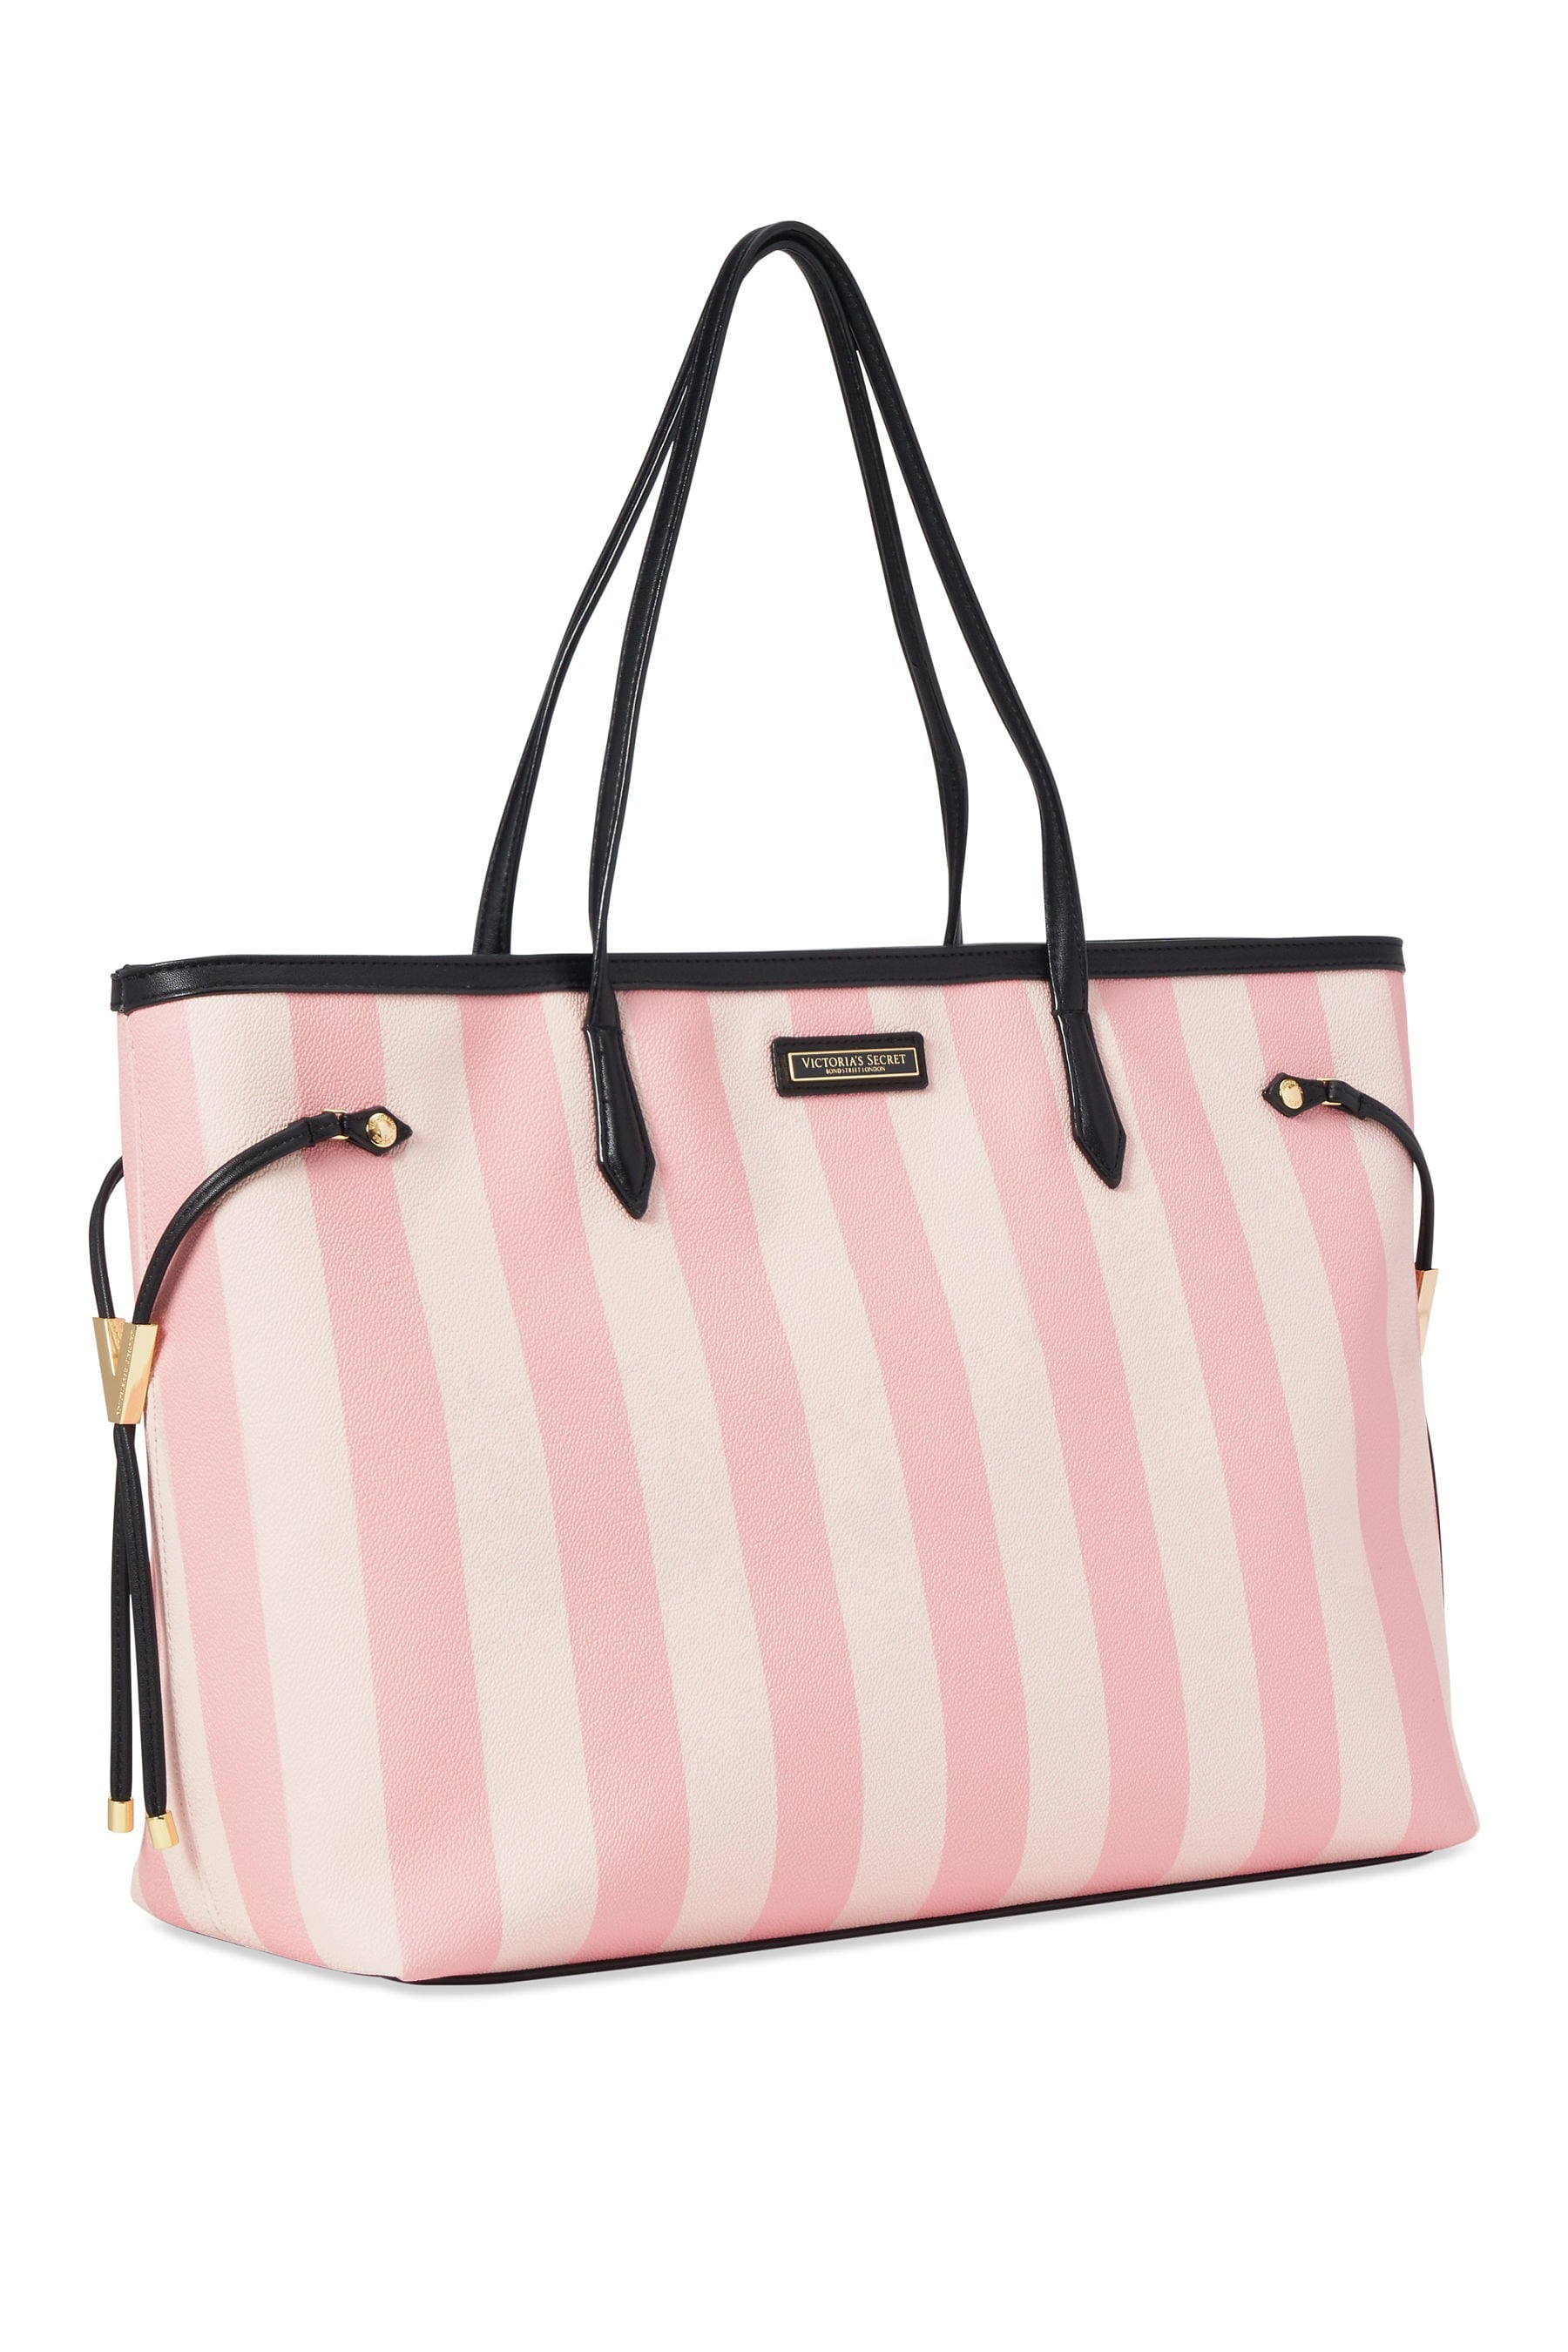 Buy Victoria s Secret Carry All Tote from the Victoria s Secret UK 